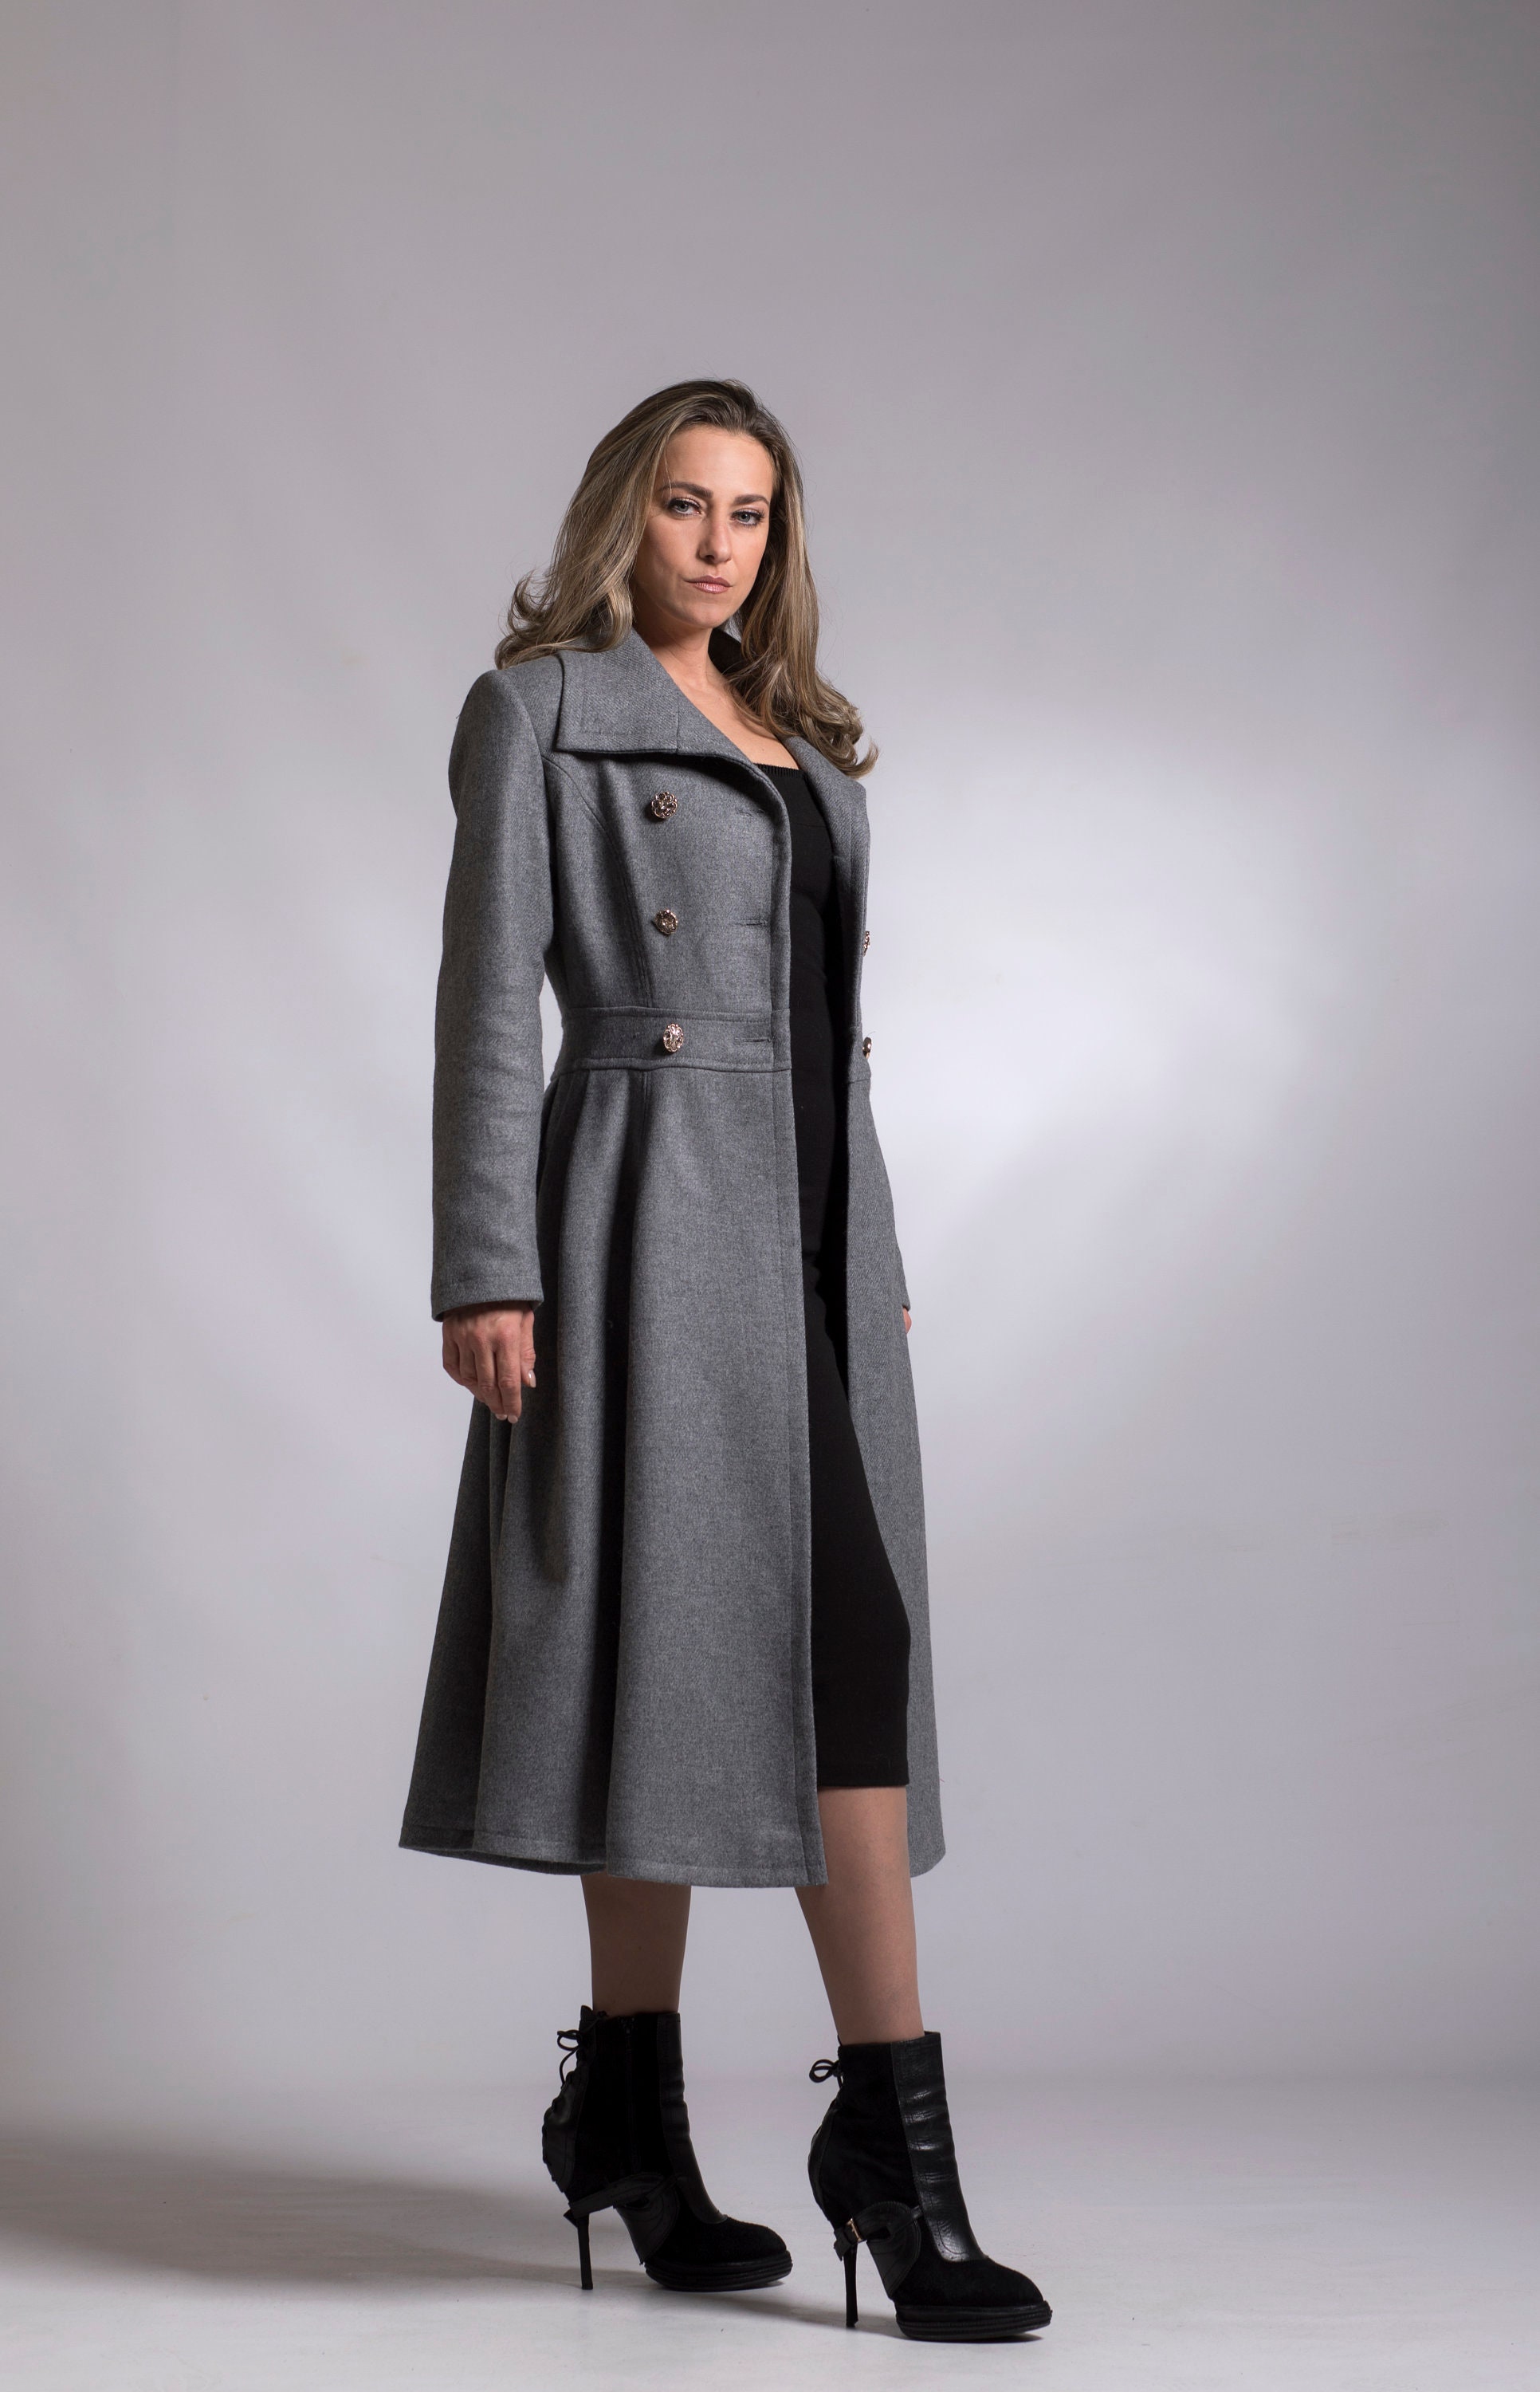 Wool Princess Coat, Fit and Flare Swing Coat, Custom Winter Dress Coat,  Cashmere Coat in Light Gray, Double-breasted Wool Tailored Overcoat 